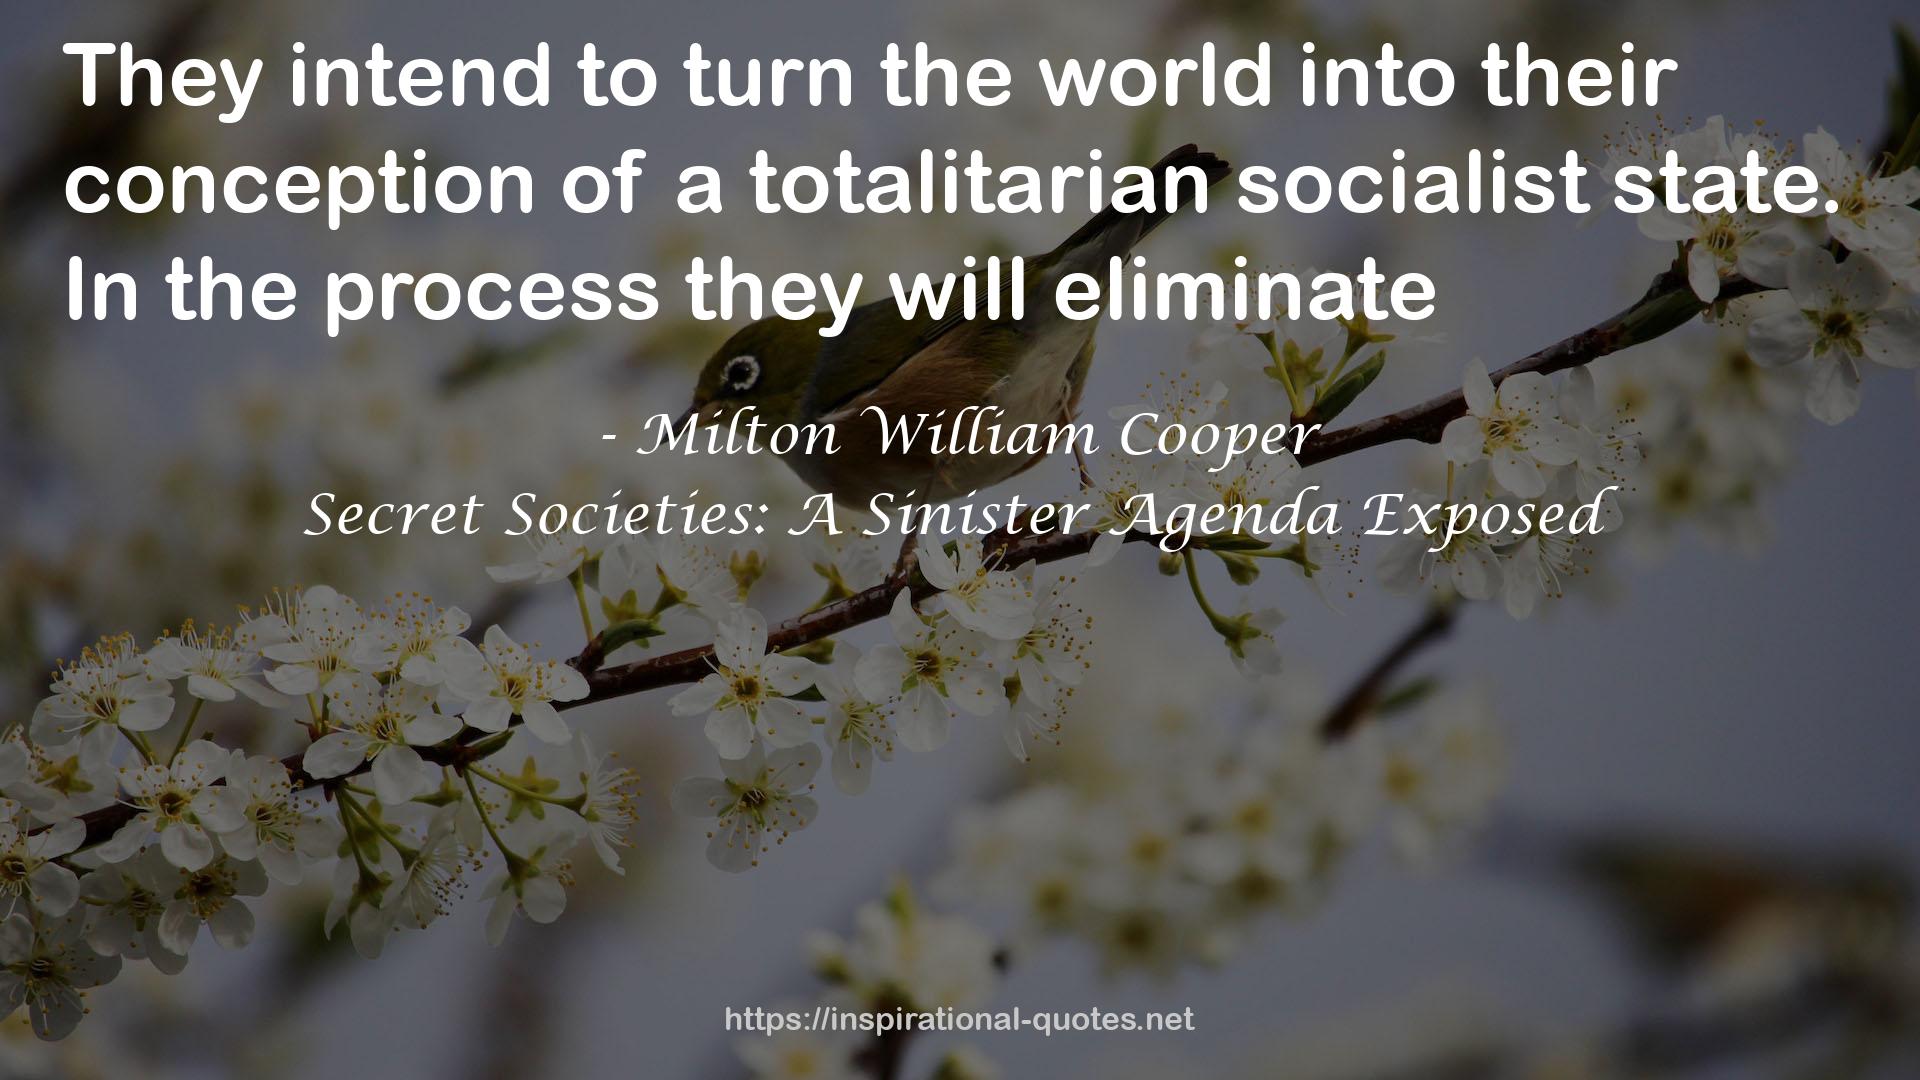 Secret Societies: A Sinister Agenda Exposed QUOTES